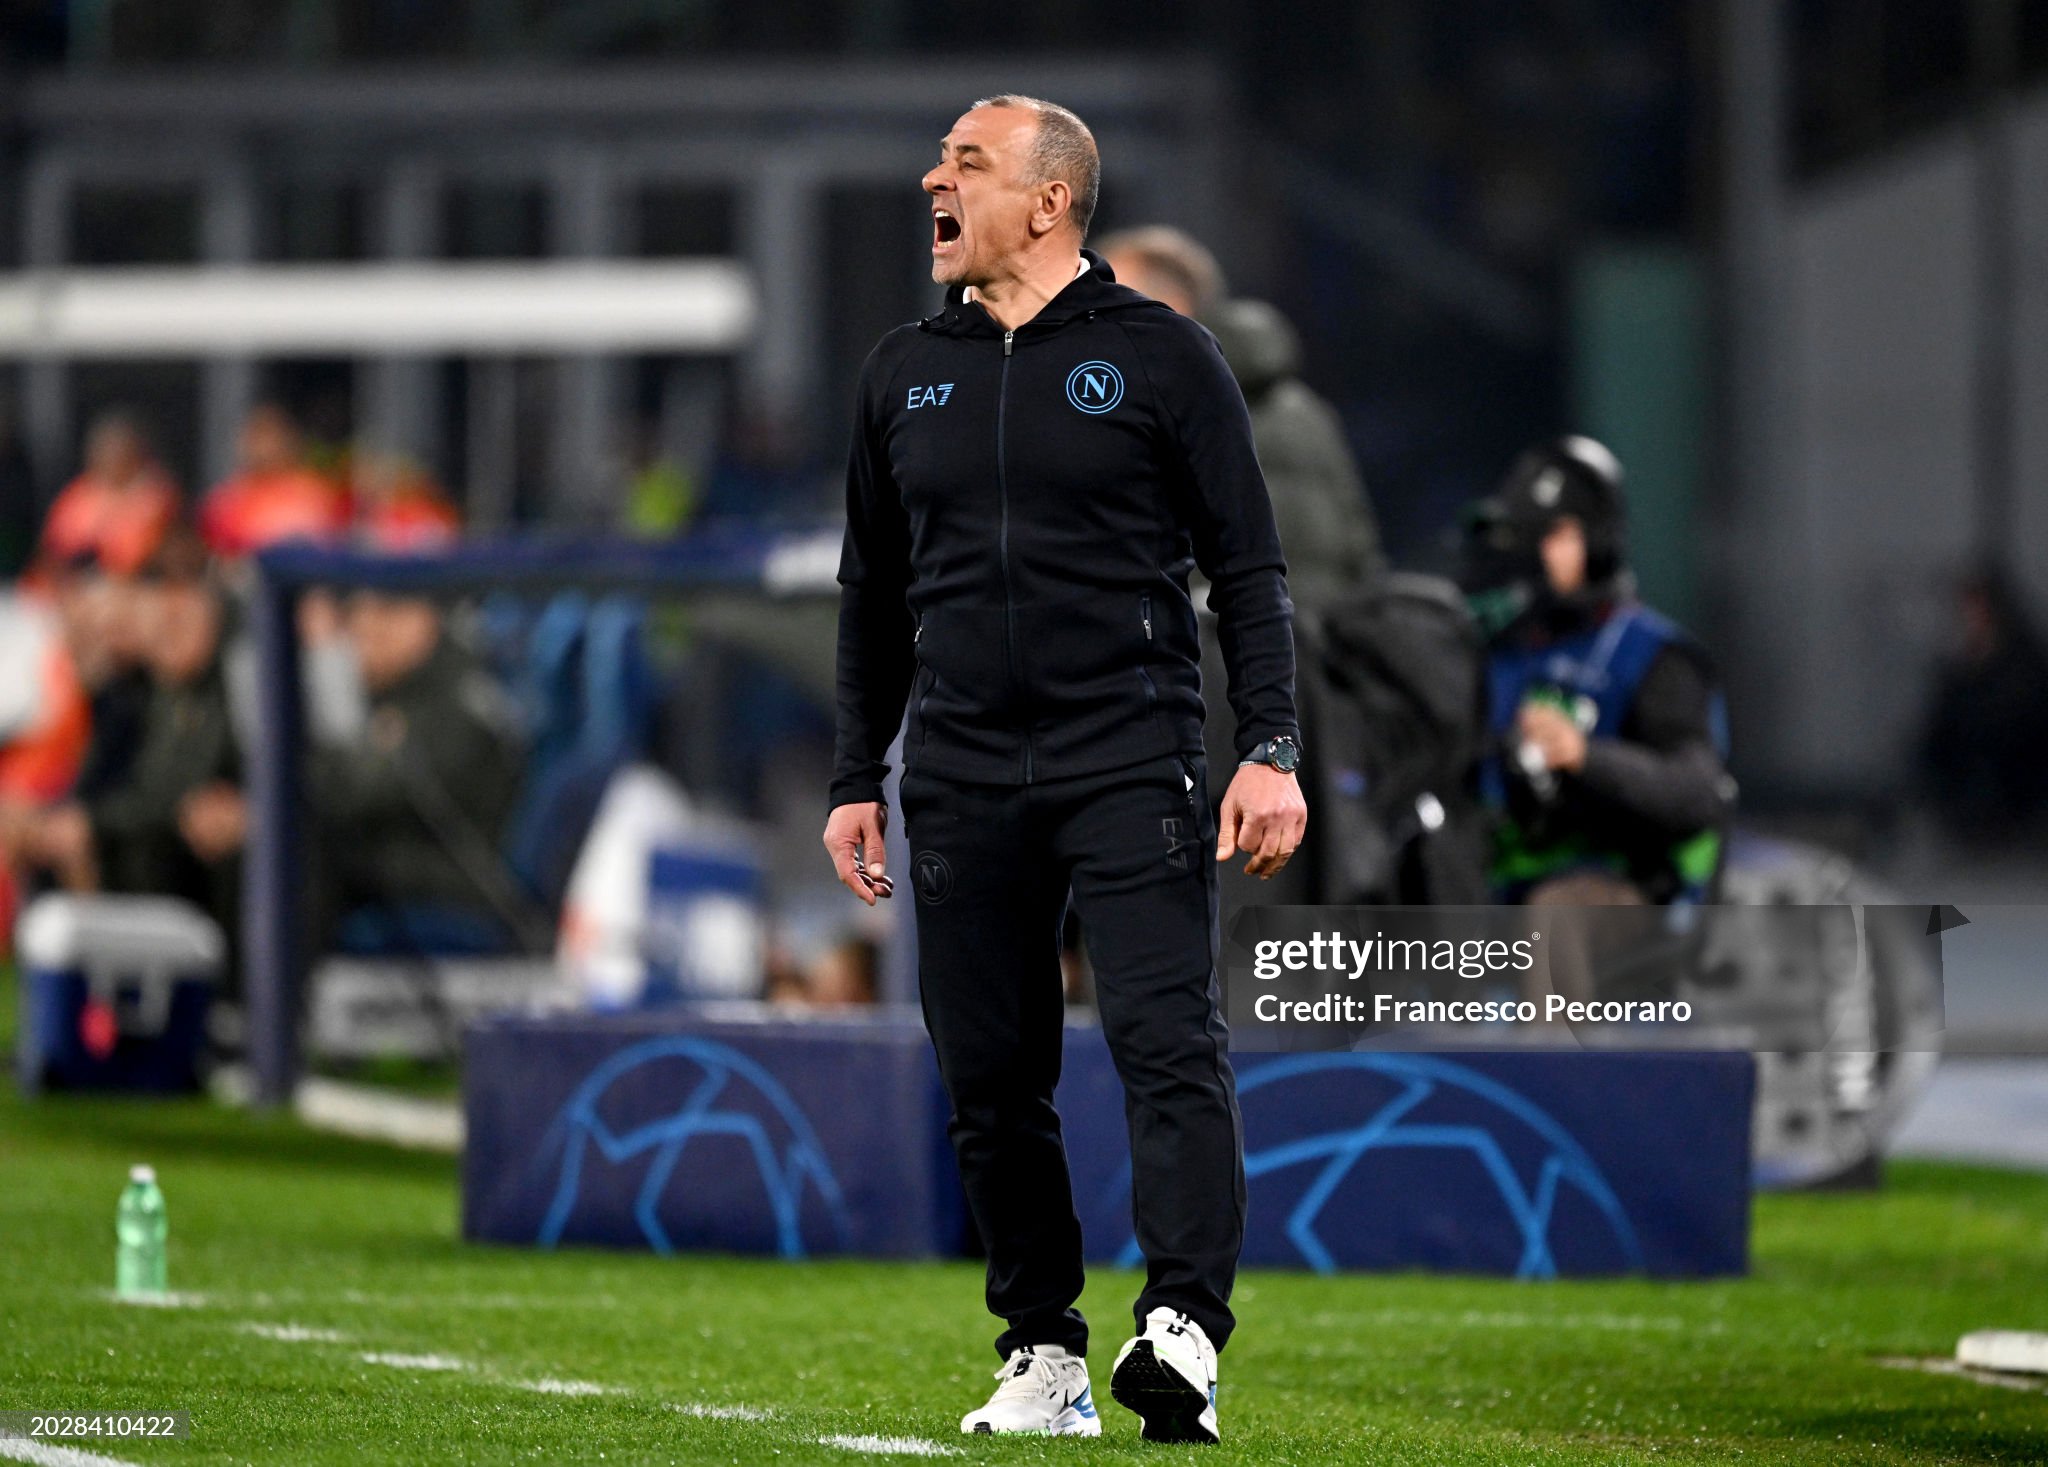 Napoli coach warns his stars after spicy substitutions